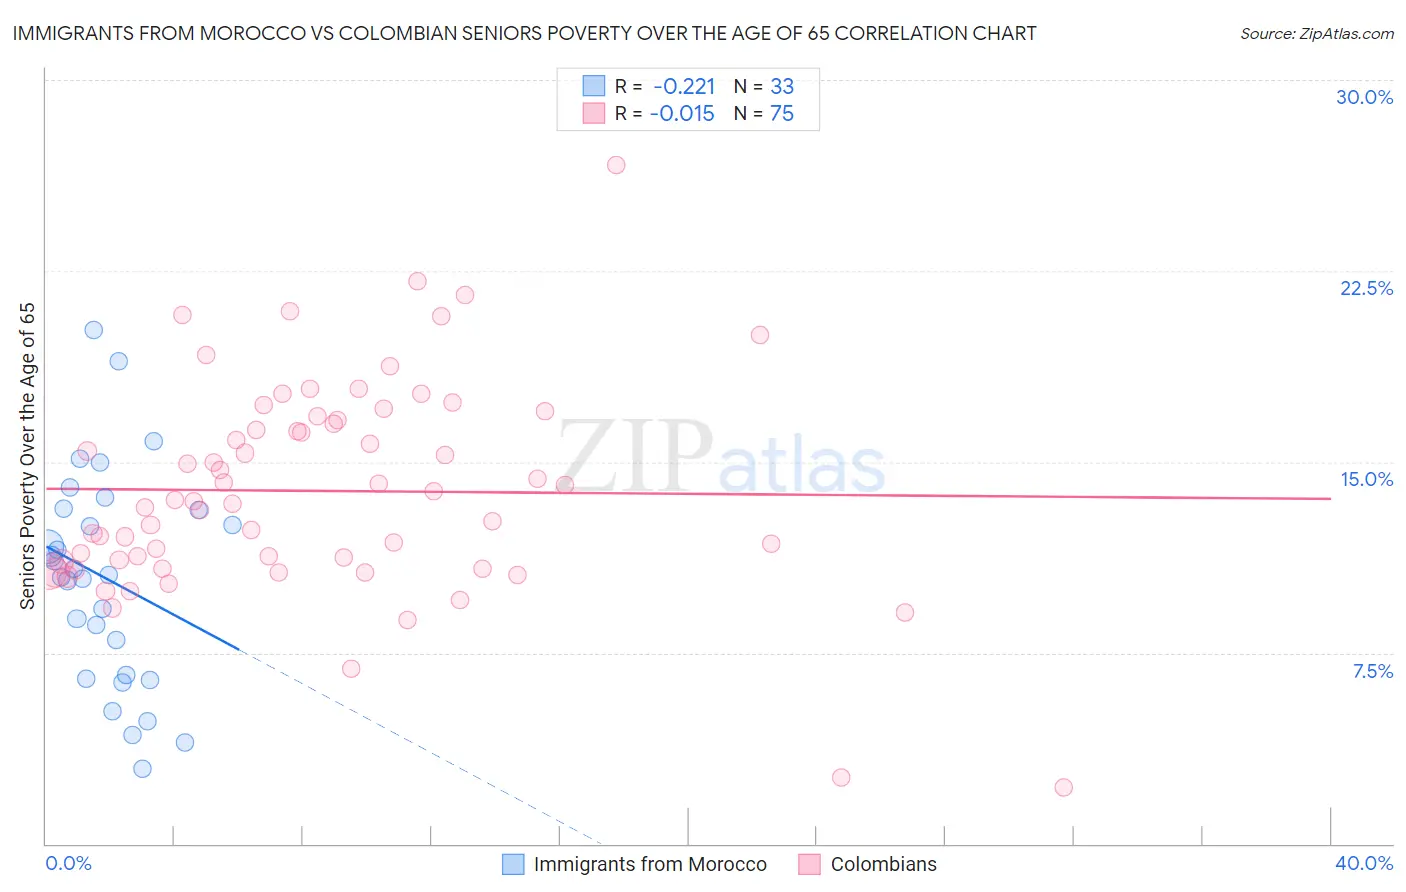 Immigrants from Morocco vs Colombian Seniors Poverty Over the Age of 65